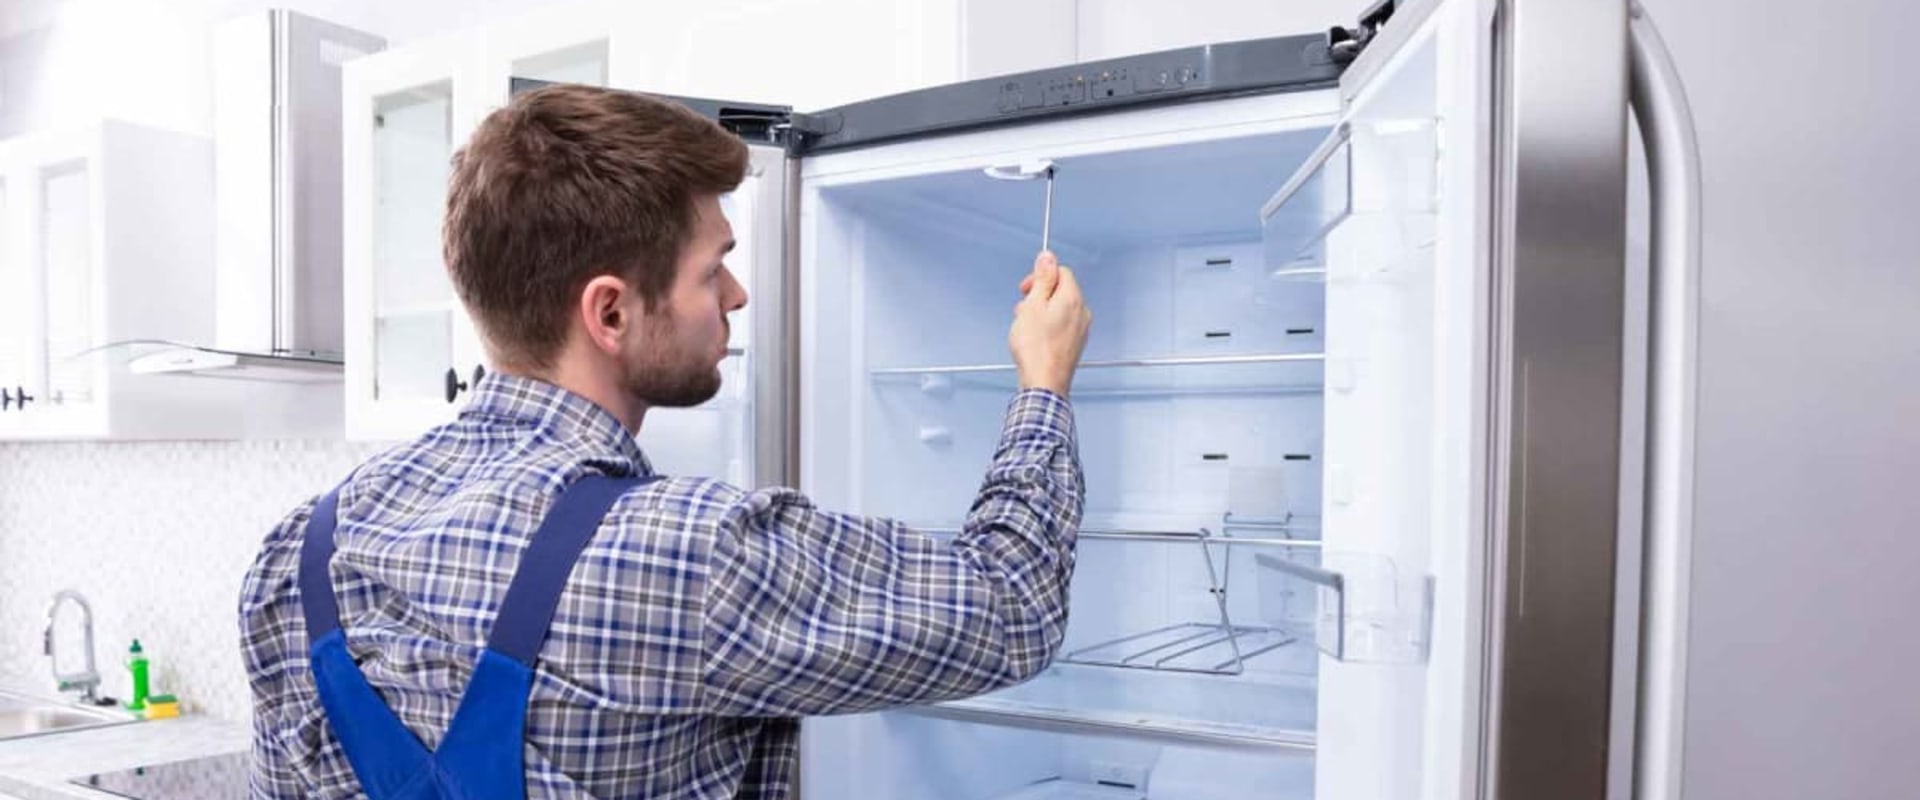 Repair or Replace: The Ultimate Guide to Making the Right Decision for Your Freezer